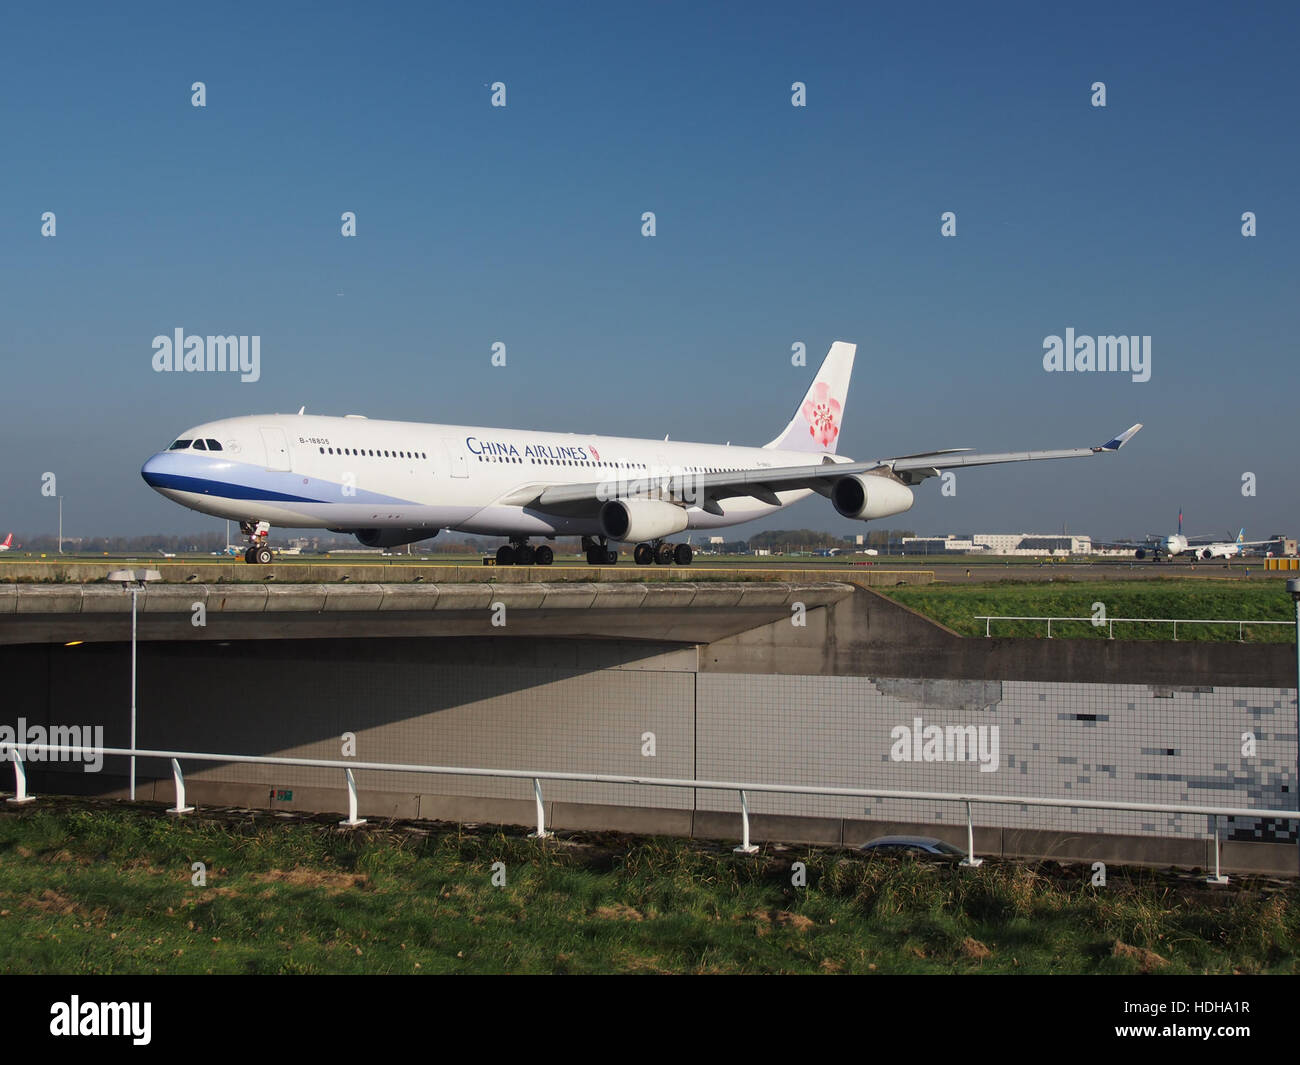 B-18805 (aircraft) China Airlines Airbus A340-313 - cn 415 at Schiphol pic3 Stock Photo